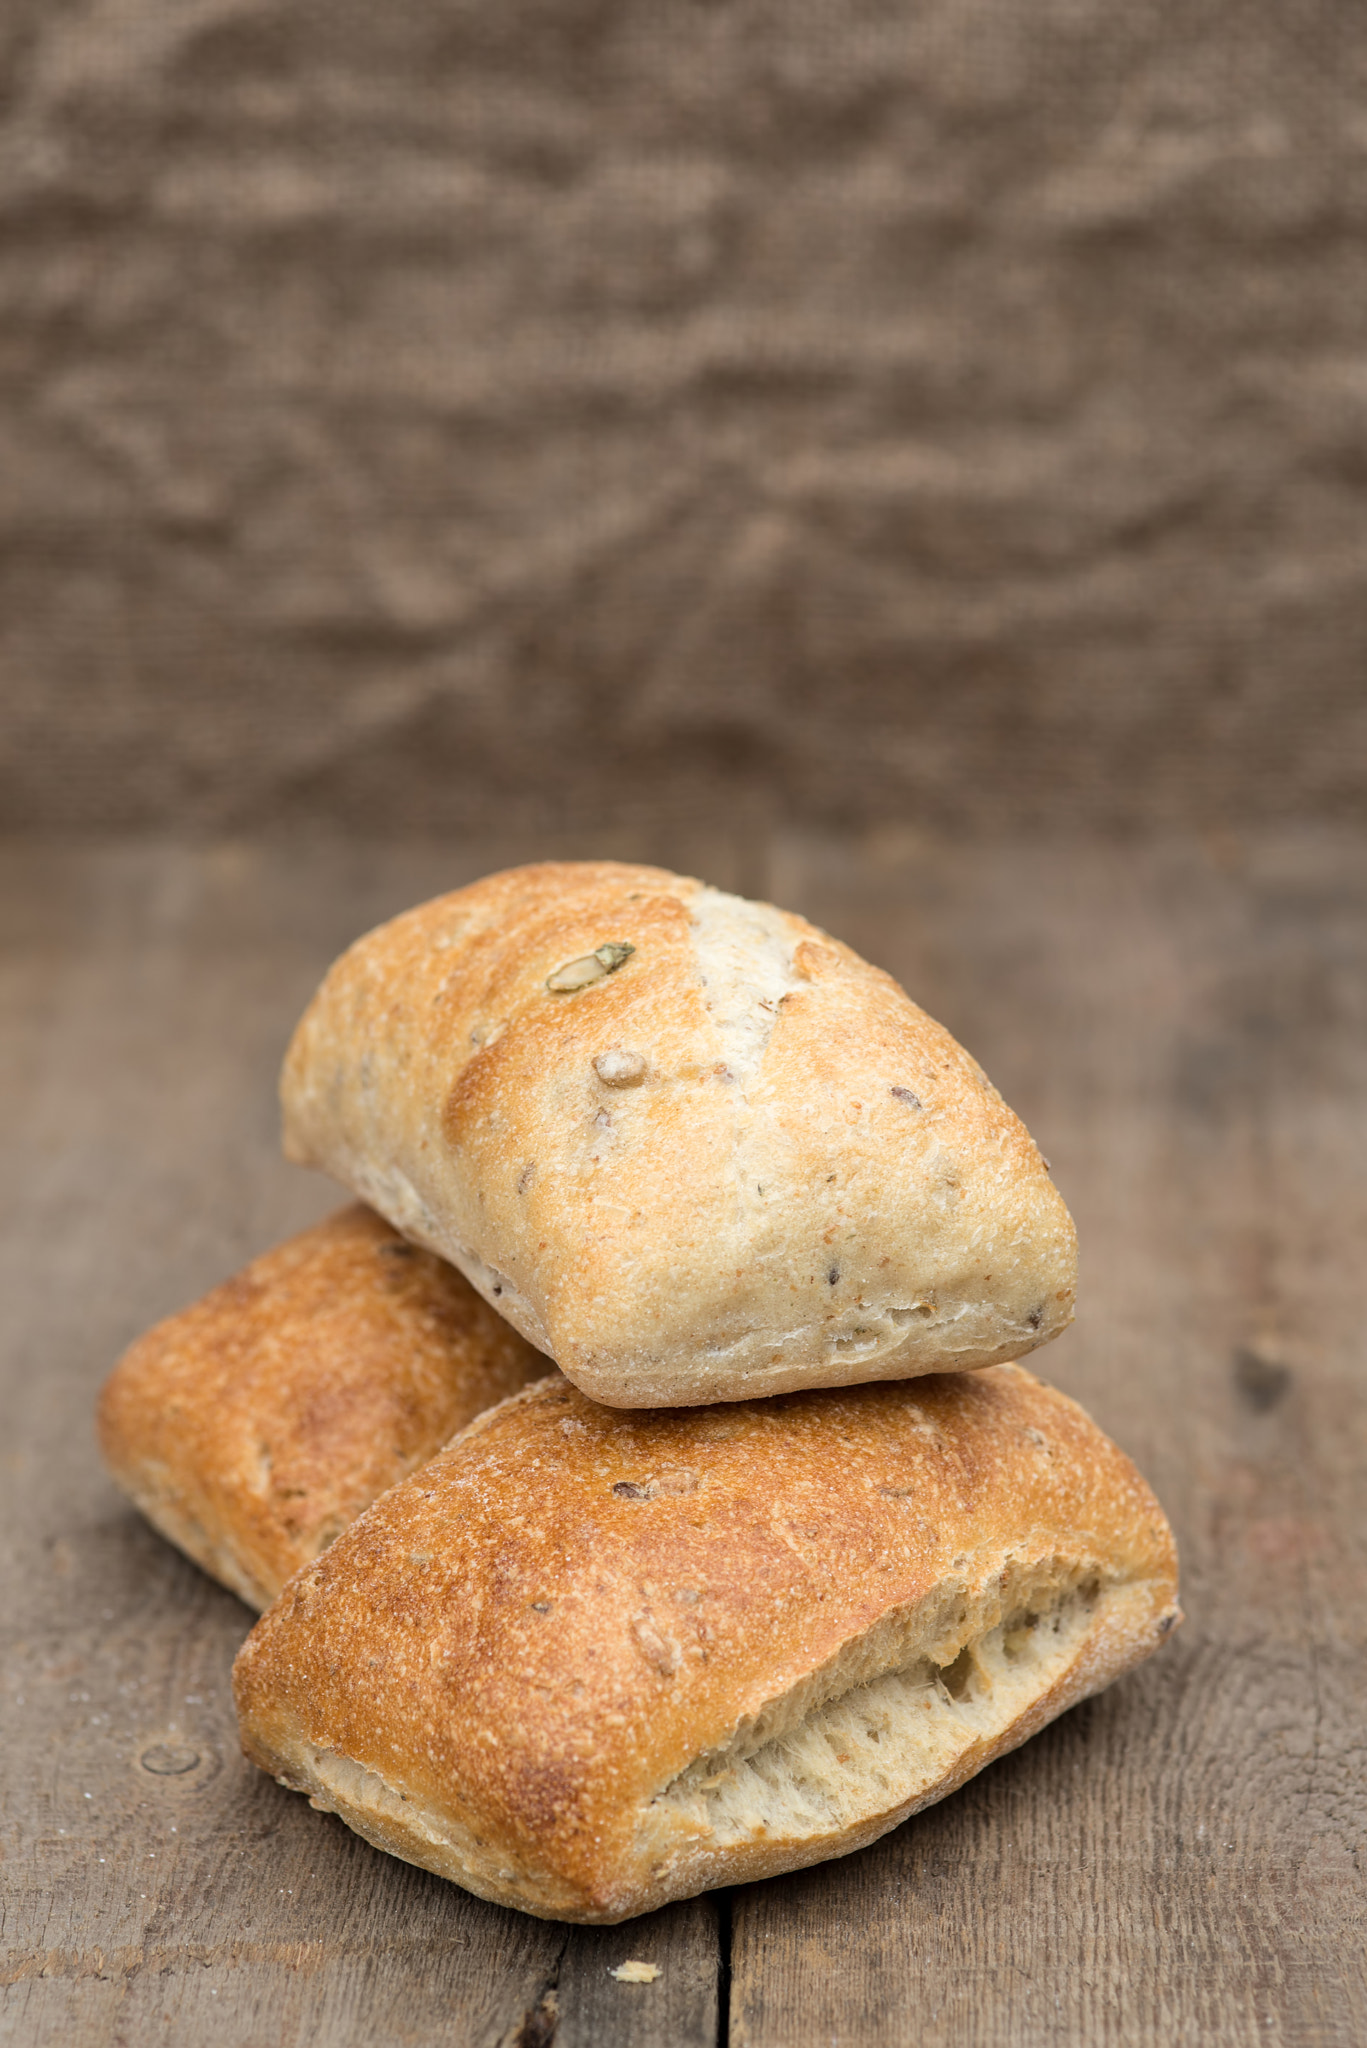 Nikon D600 + Sigma 105mm F2.8 EX DG Macro sample photo. Olive bread rollis in rustic kitchen setting with utensils photography